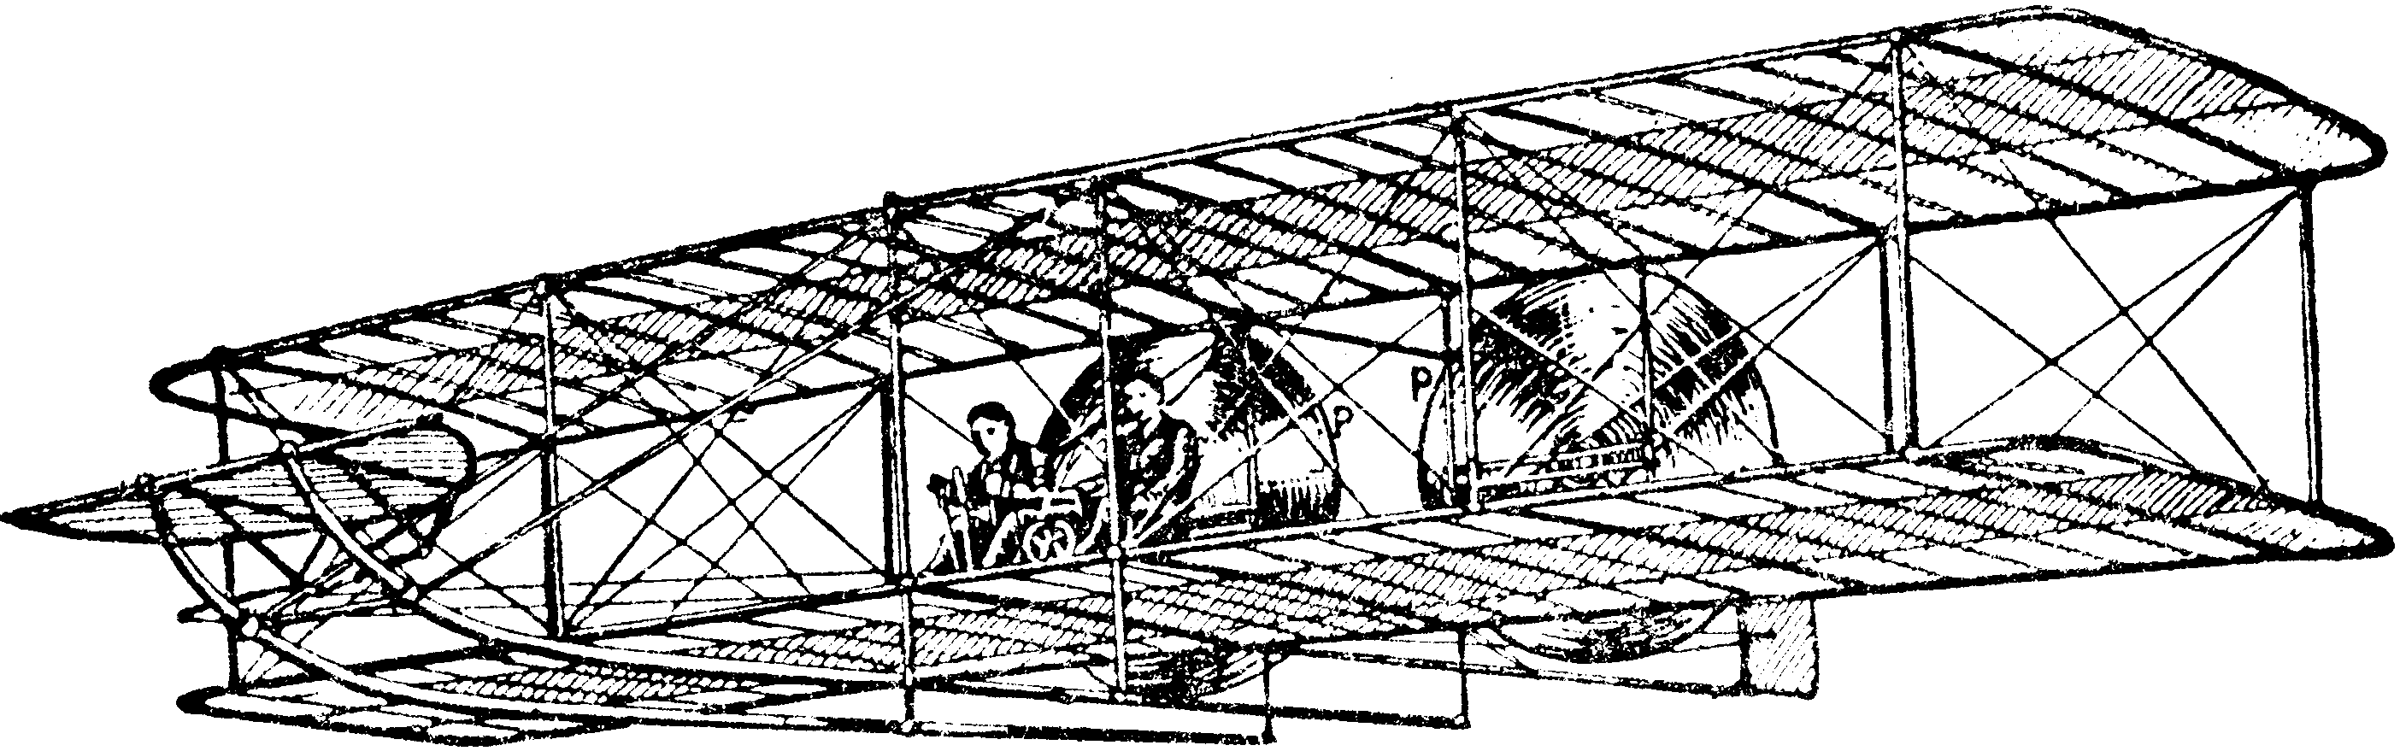 wright flyer clipart - photo #5